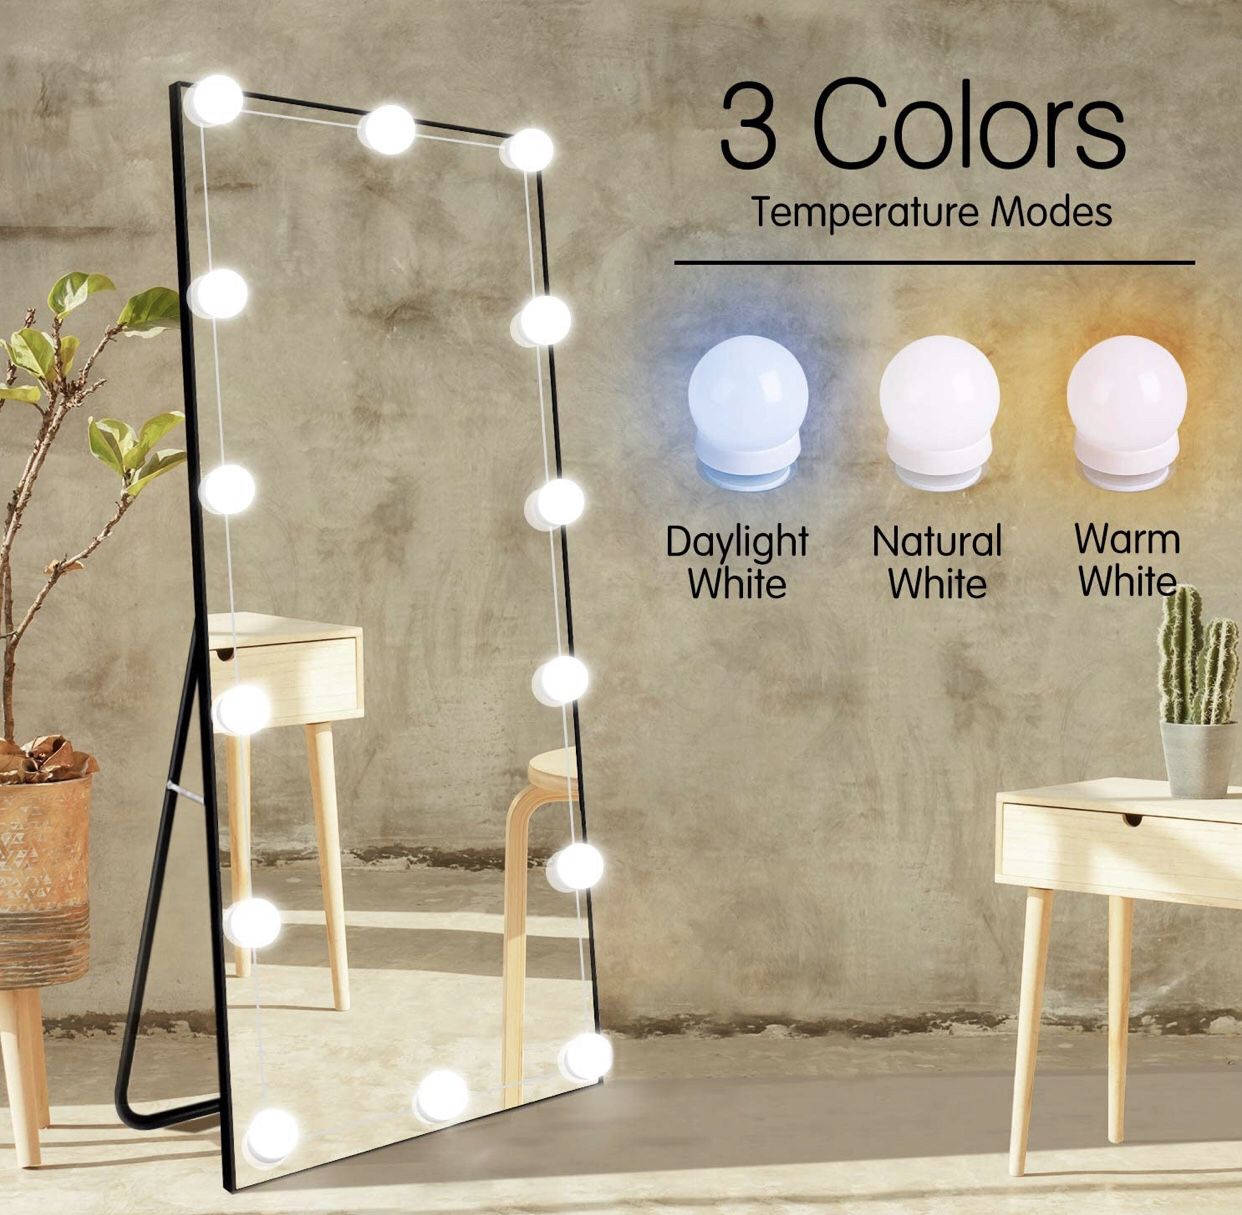 Hollywood Led Vanity Lights Strip Kit with 14 Dimmable Light Bulbs for Full Body Length Makeup Mirror, Wall Mirror, Plug in Vanity Mirror Lights with 